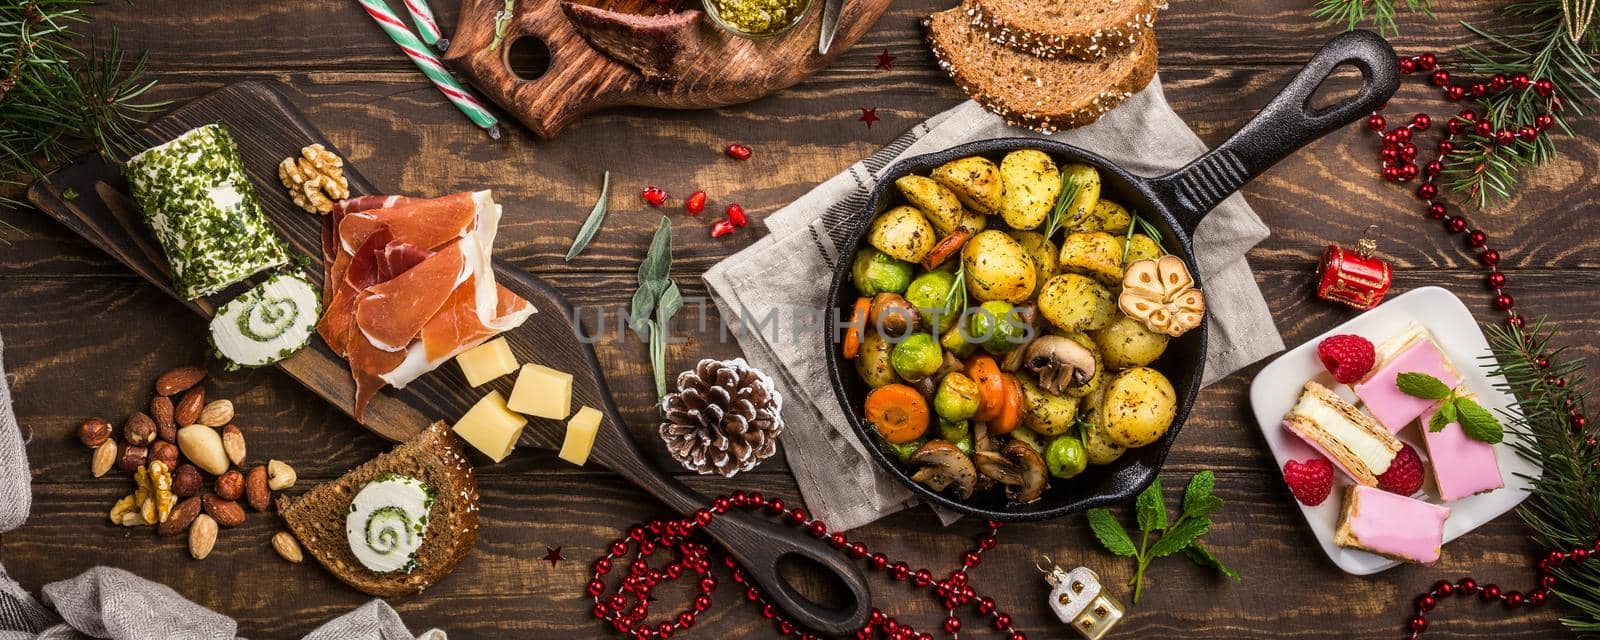 Banner of Delicious Christmas themed dinner table with roasted meat steak, appetizers and desserts. Top view. Holiday concept.